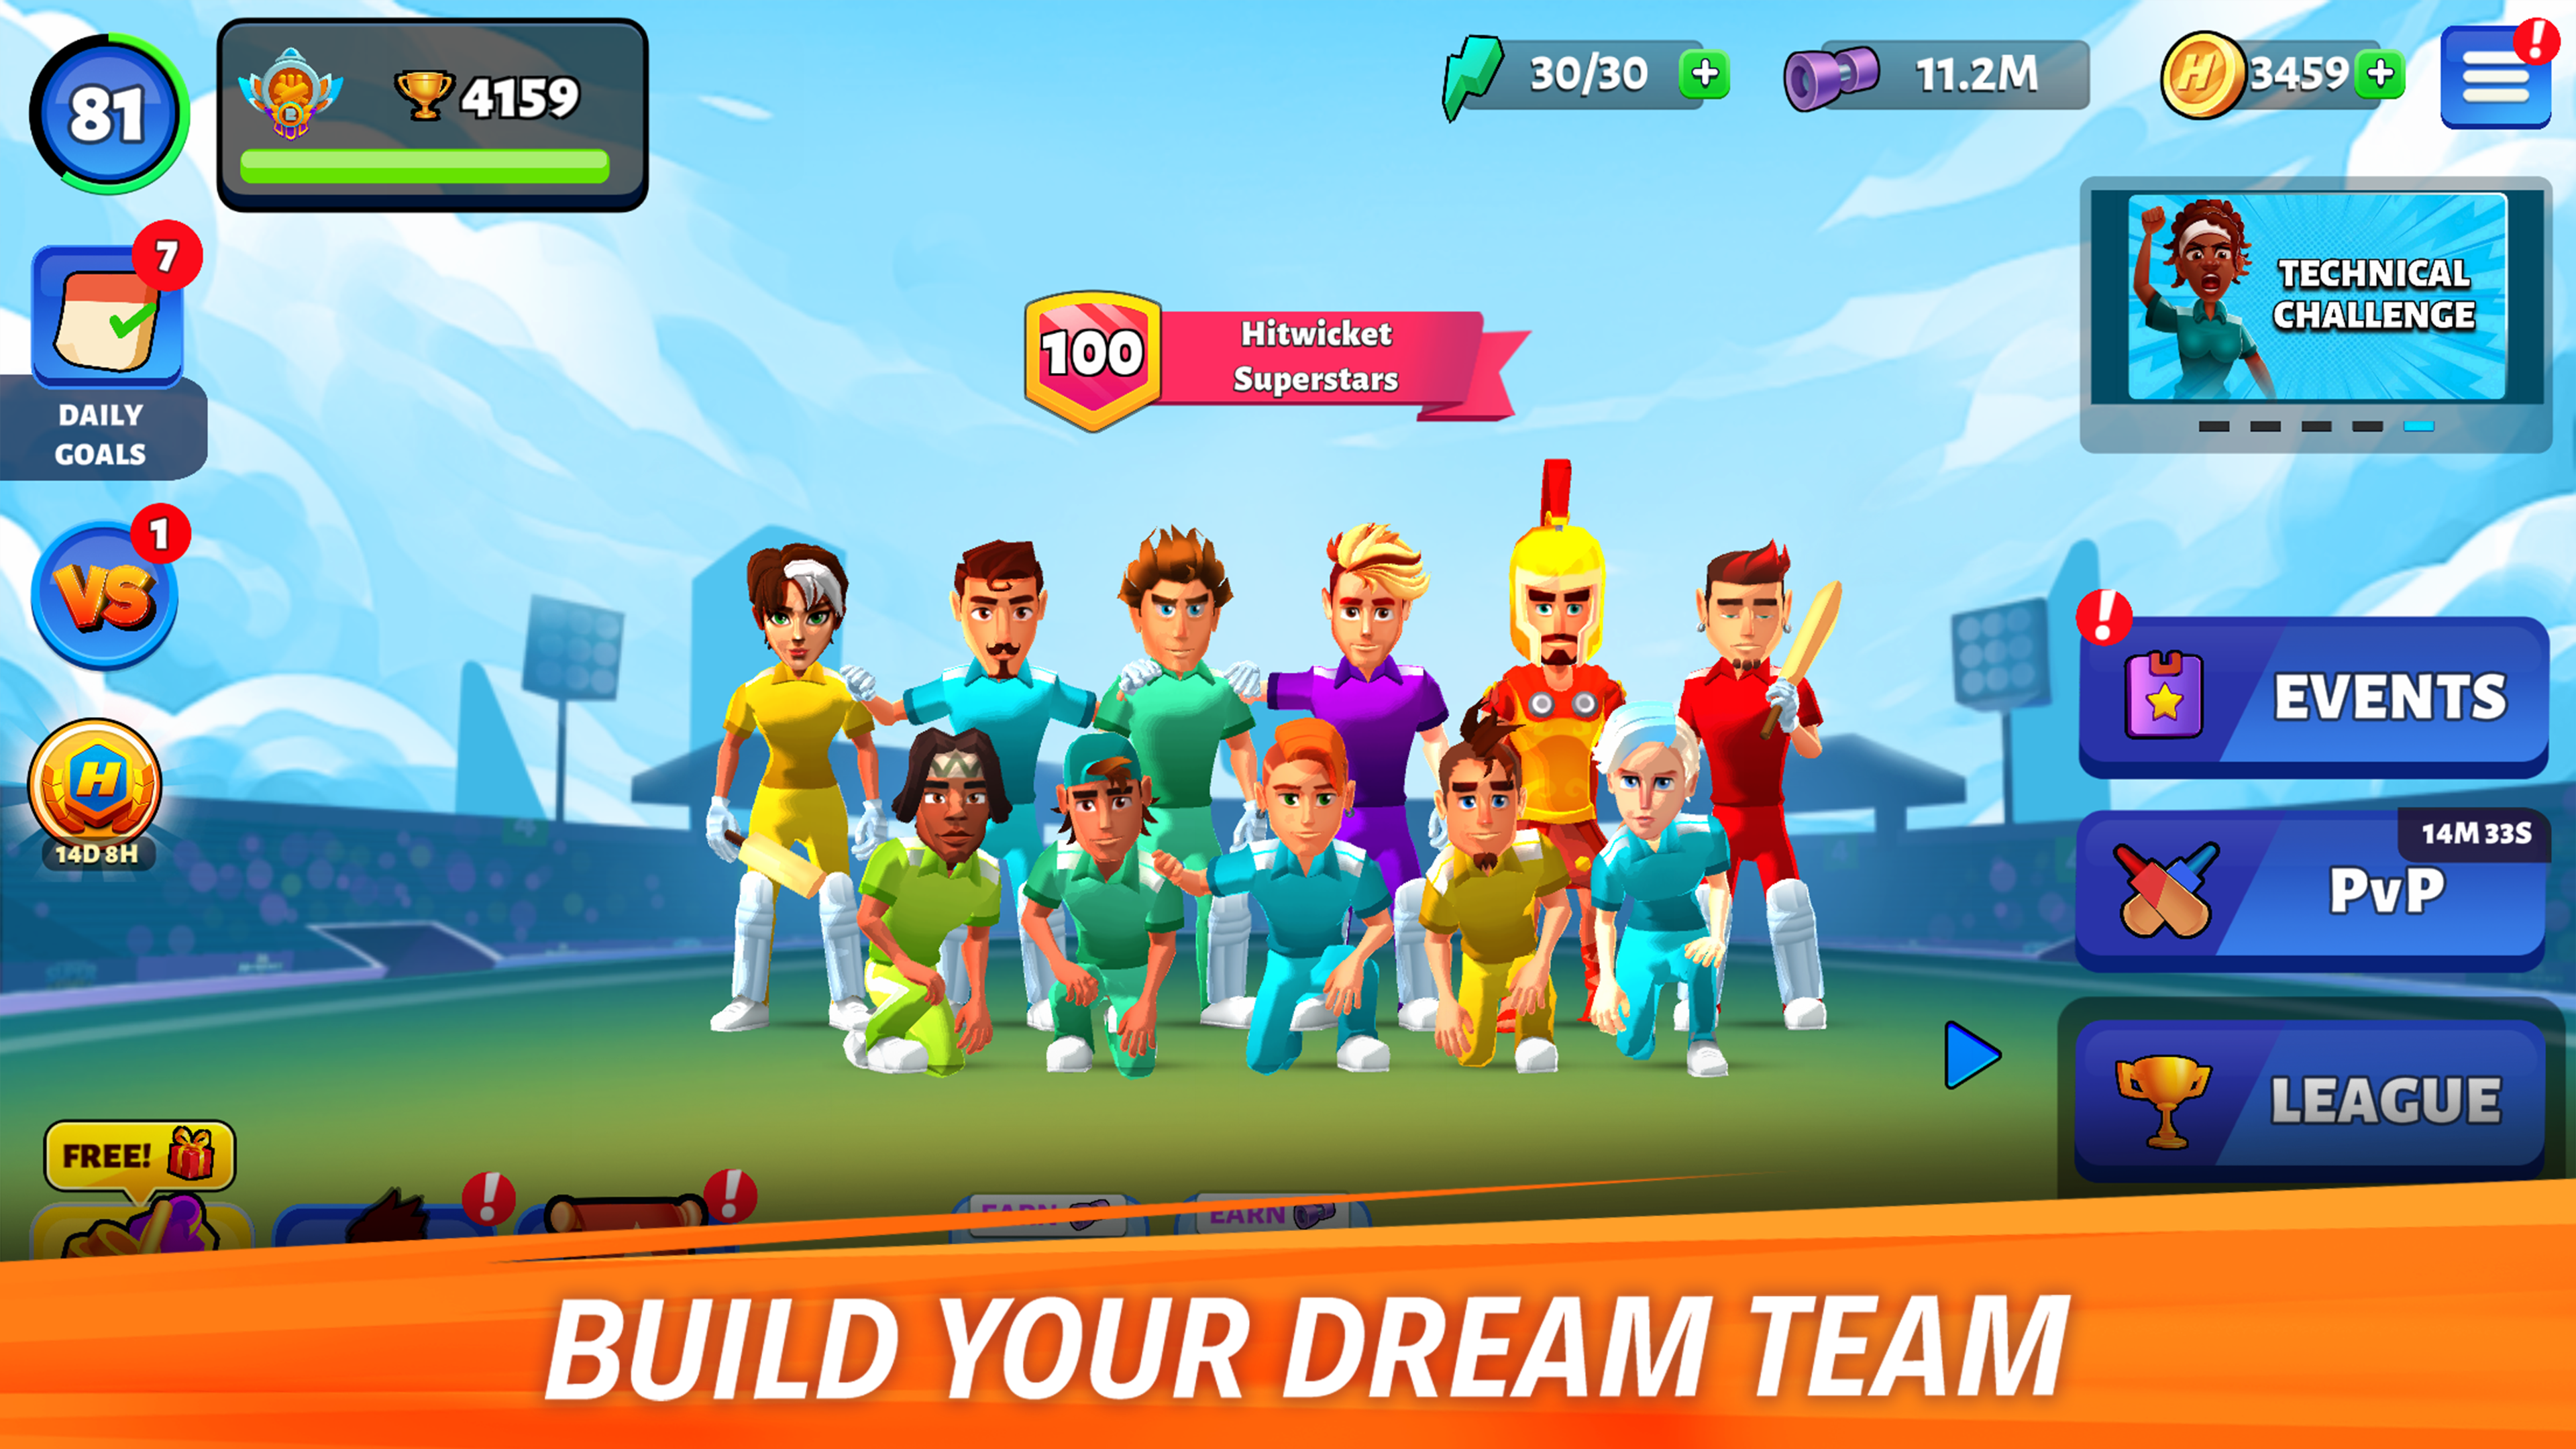 Screenshot 1 of Hitwicket An Epic Cricket Game 8.0.0